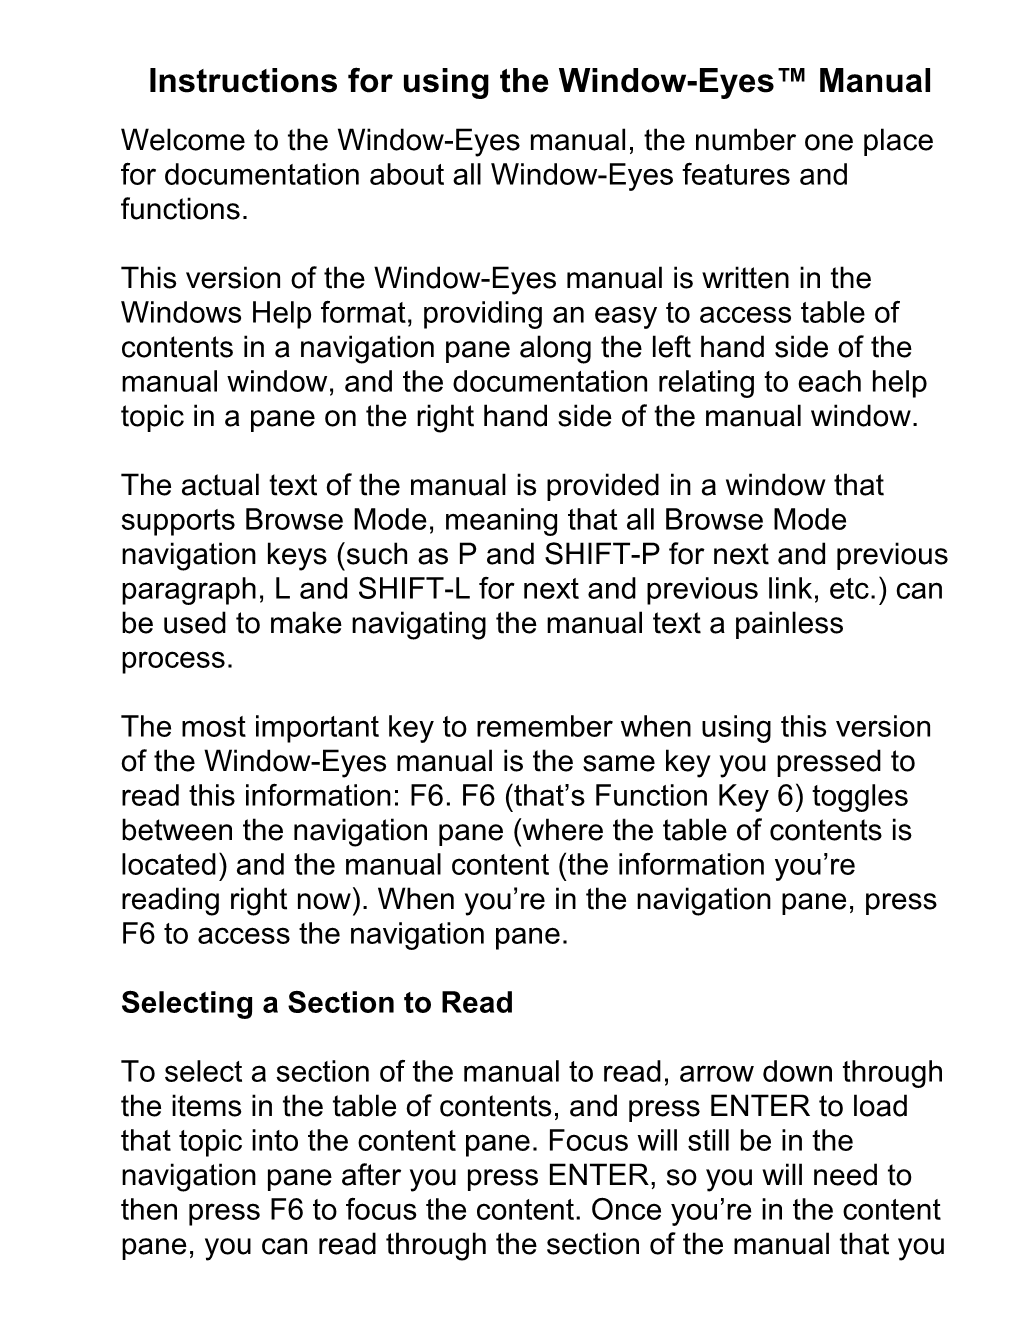 Instructions for Using the Window-Eyes Manual